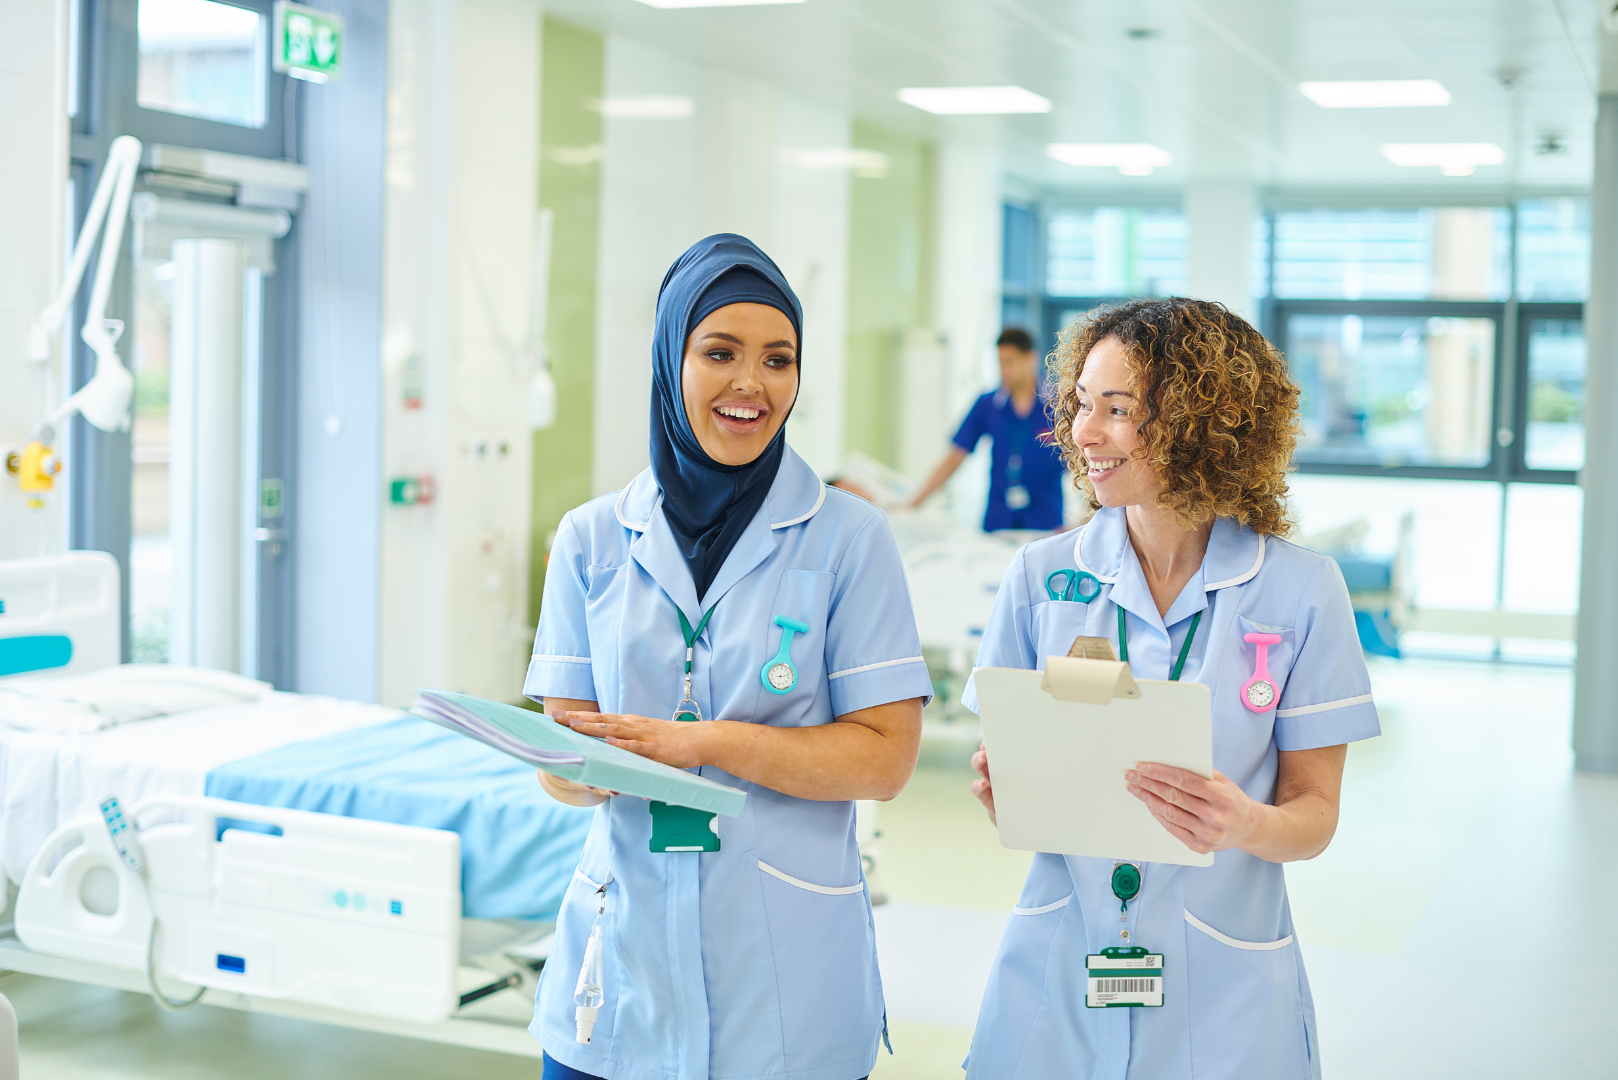 From UAE to USA: The Bold Journey of Nurses Taking NCLEX and Chasing Dreams